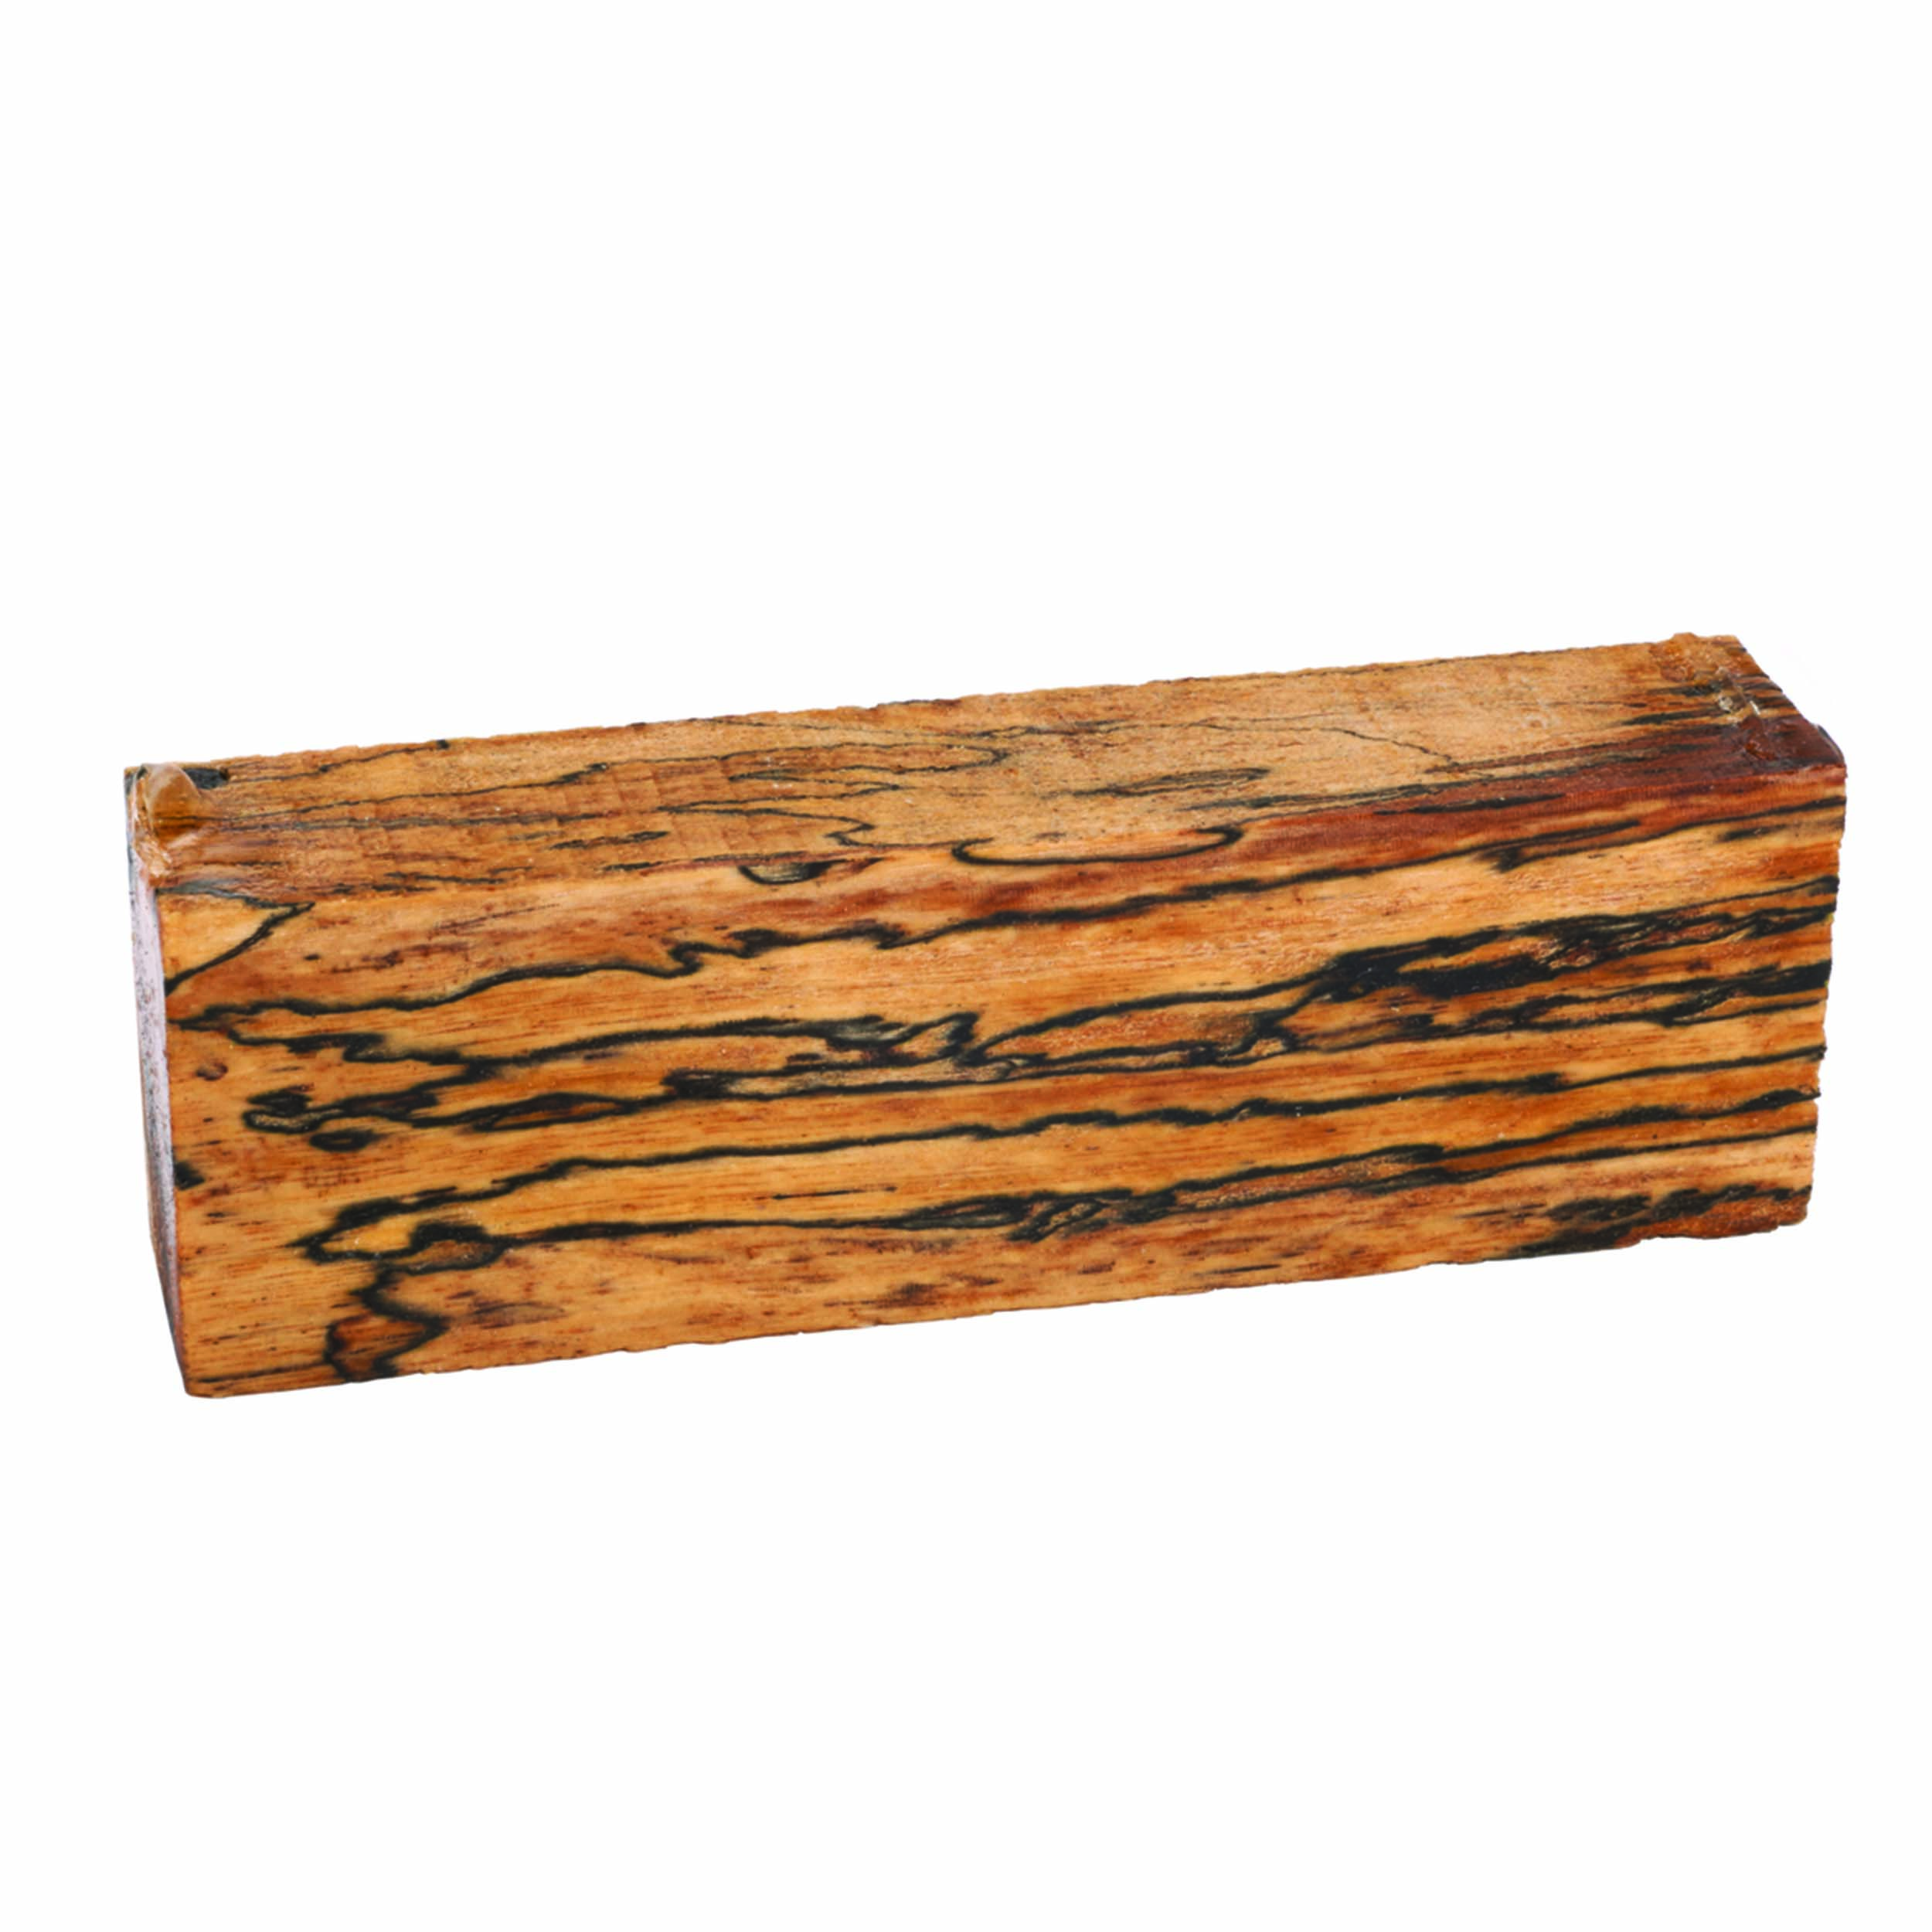 Tamarind, Spalted Stabilized 1" X 1-1/2" X 5" Knife Scale 1-piece